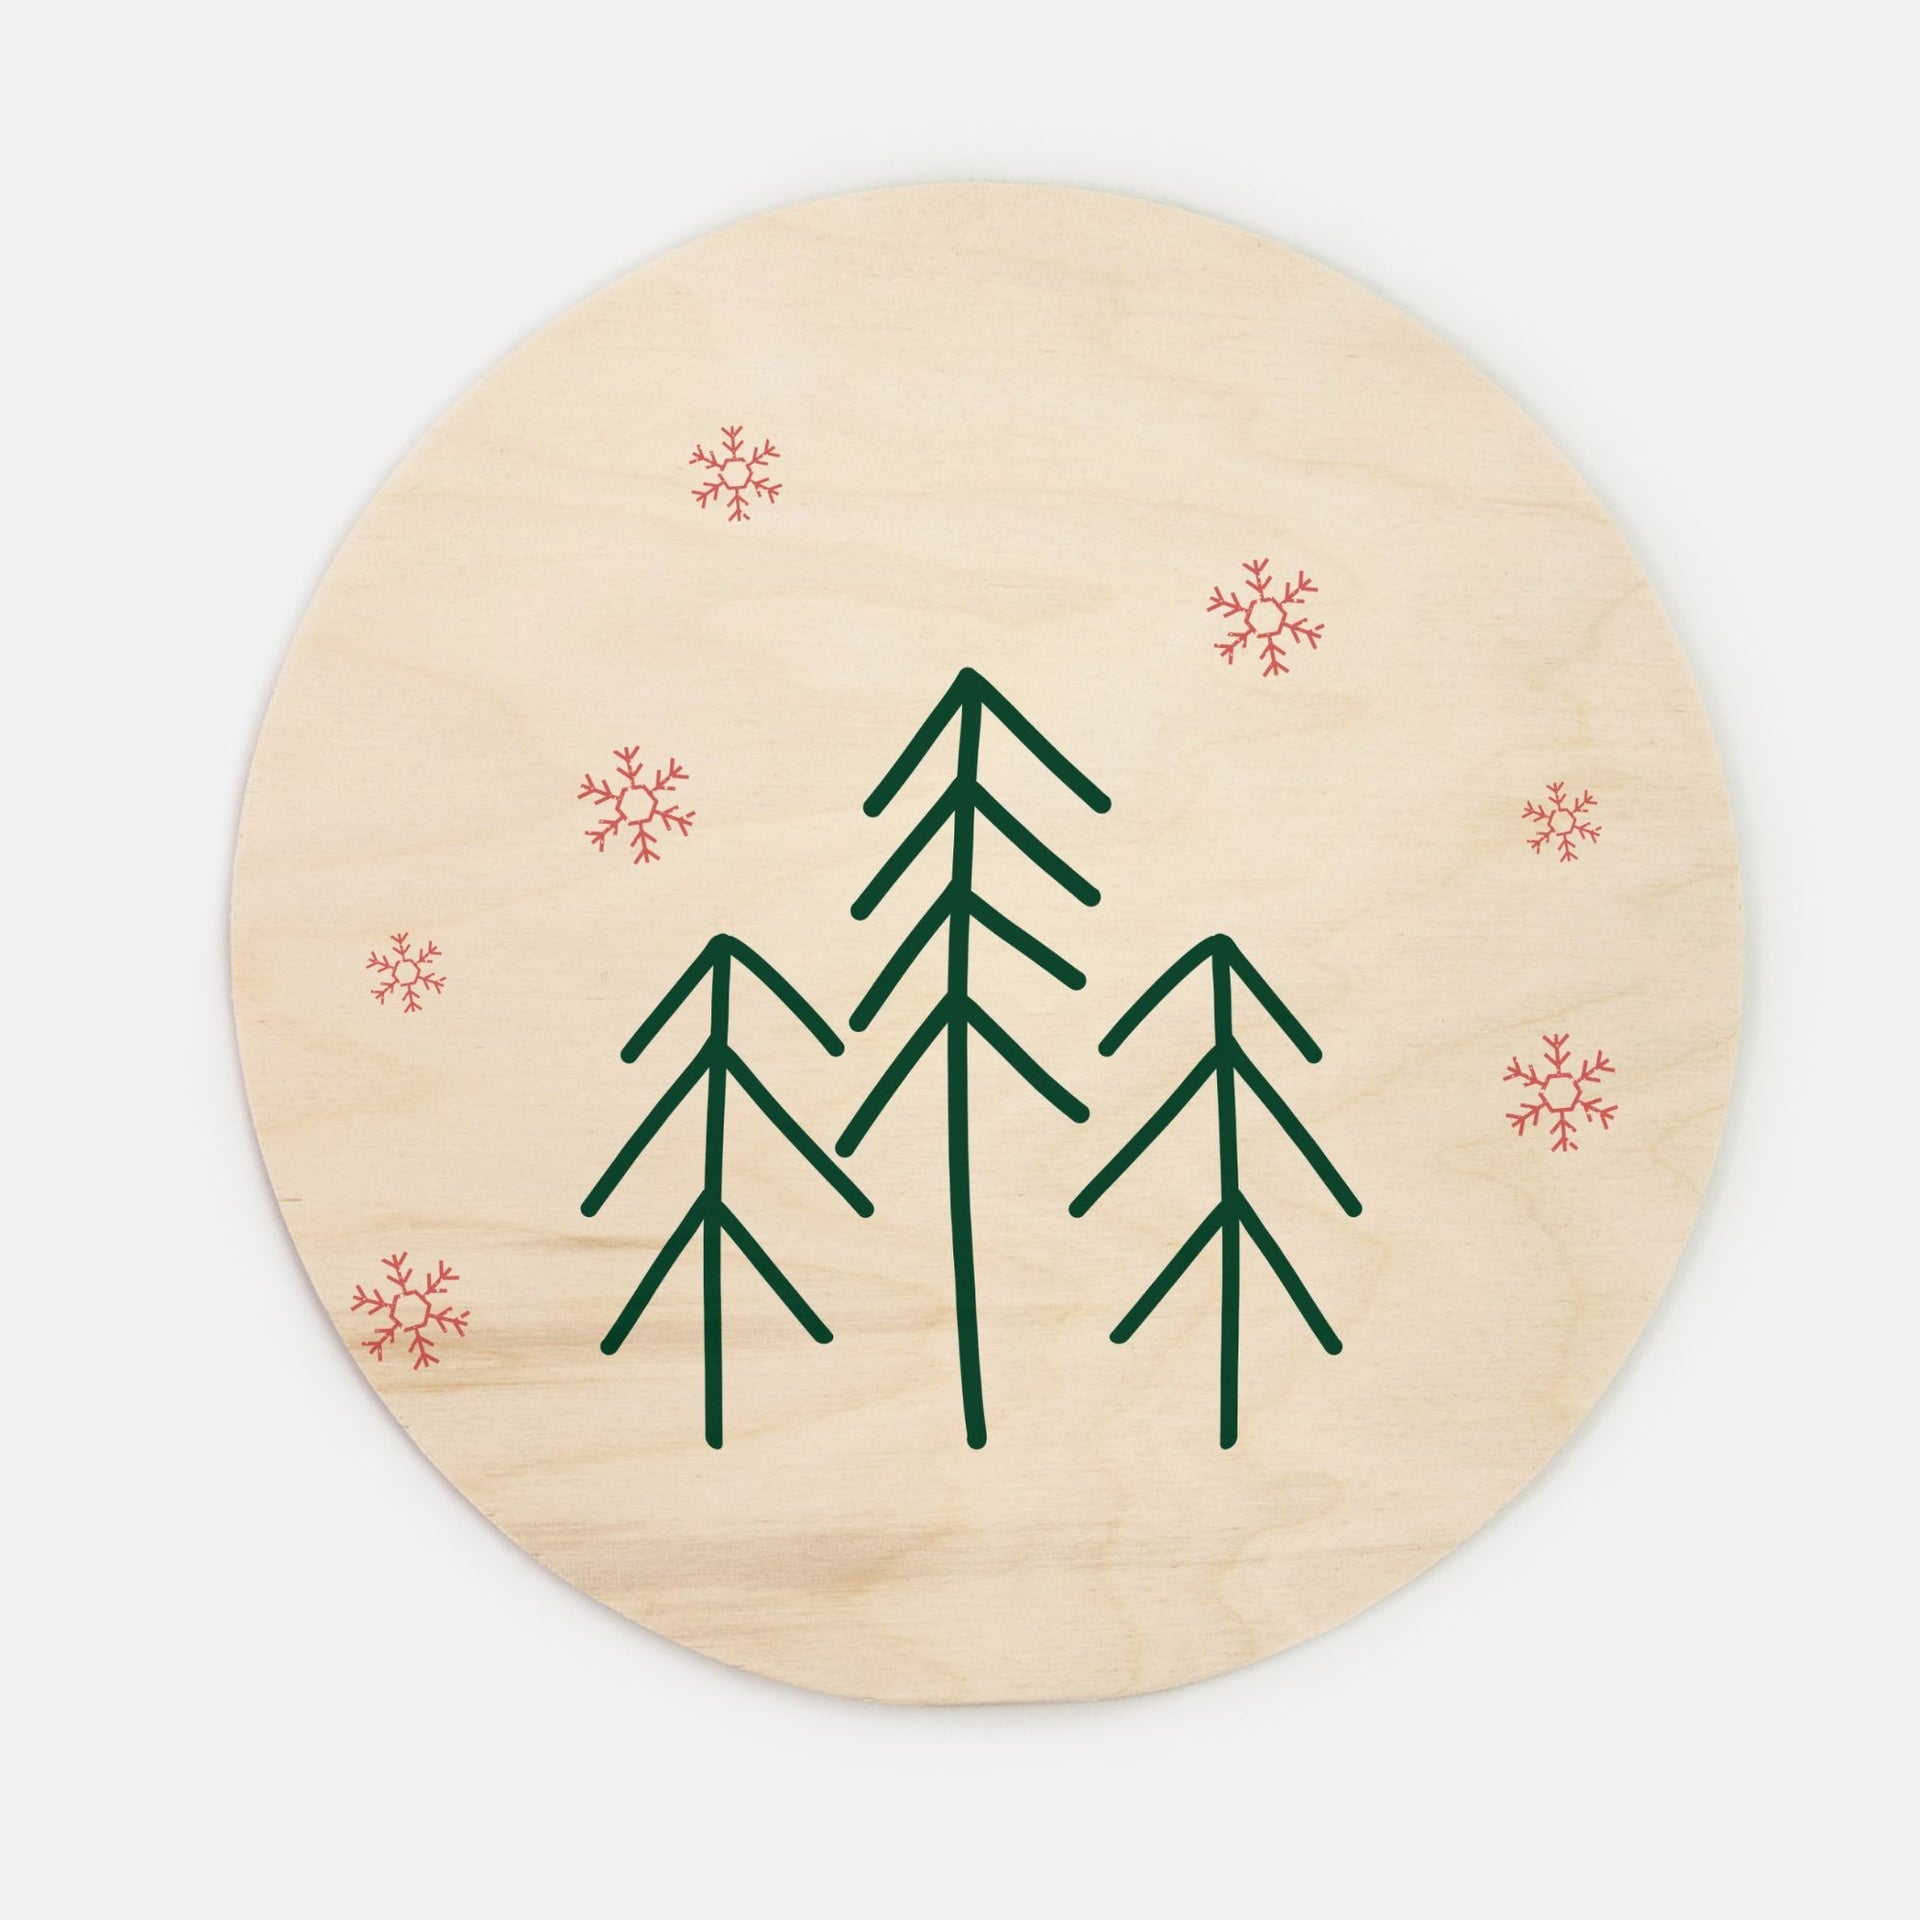 10" Round Wood Sign - Evergreen Trees & Red Snowflakes